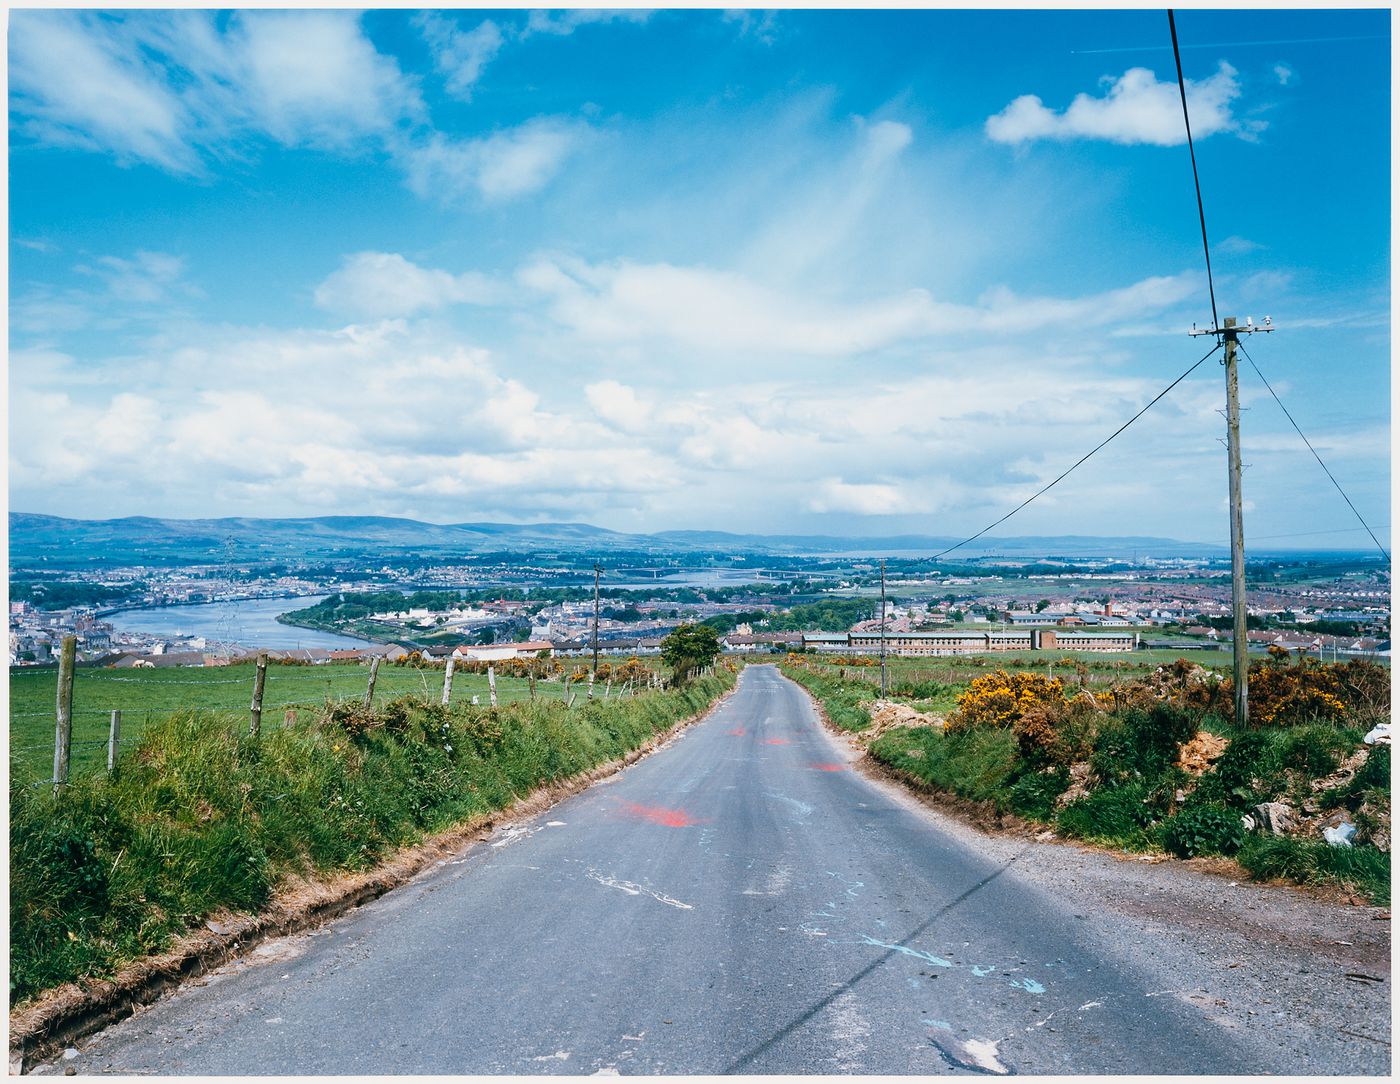 Asphalt road through pastures looking toward city on a river, Derry (Londonderry), Northern Ireland